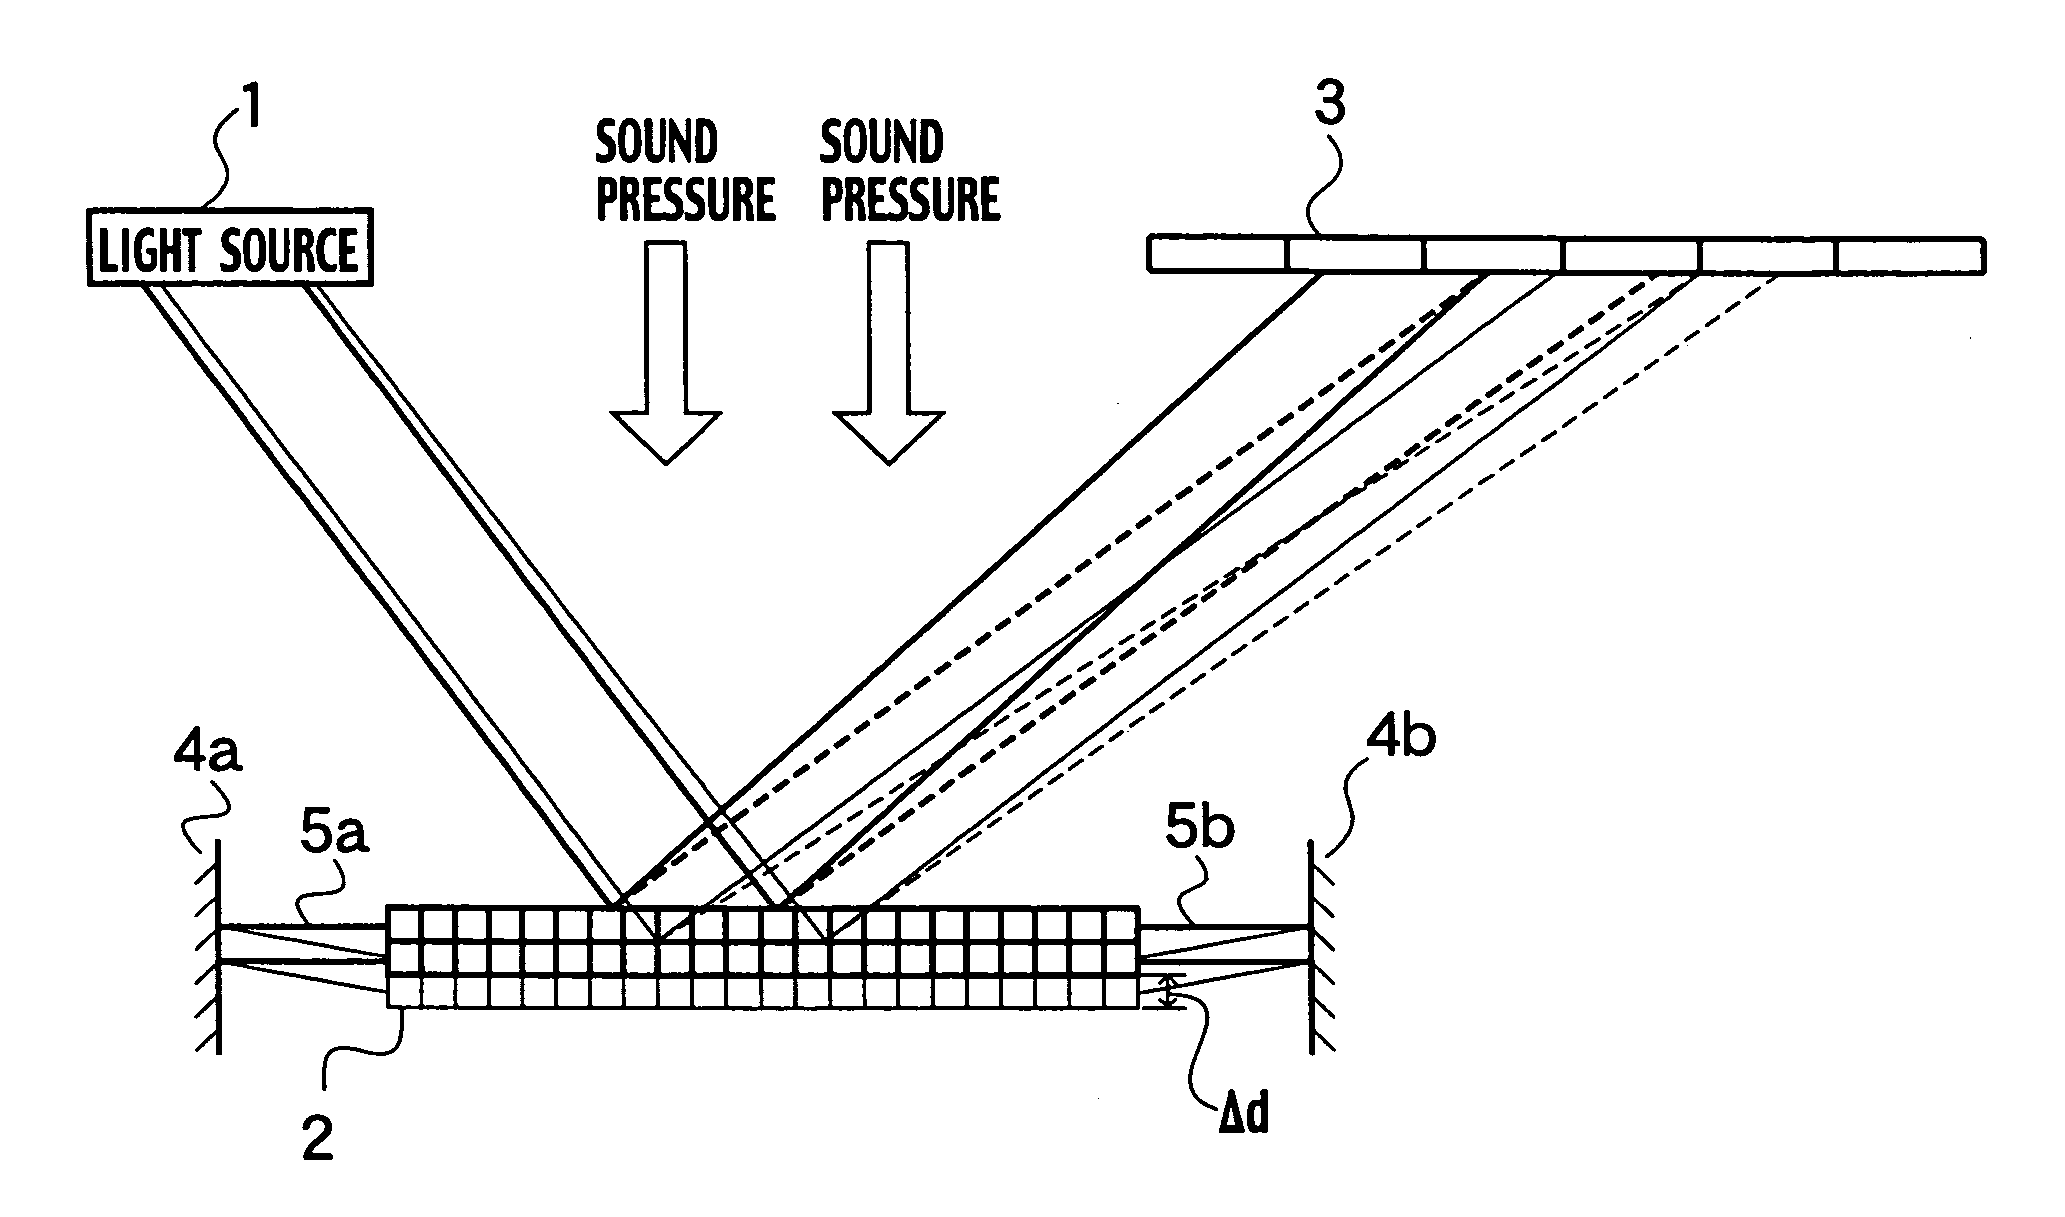 Opto-acoustoelectric device and methods for analyzing mechanical vibration and sound